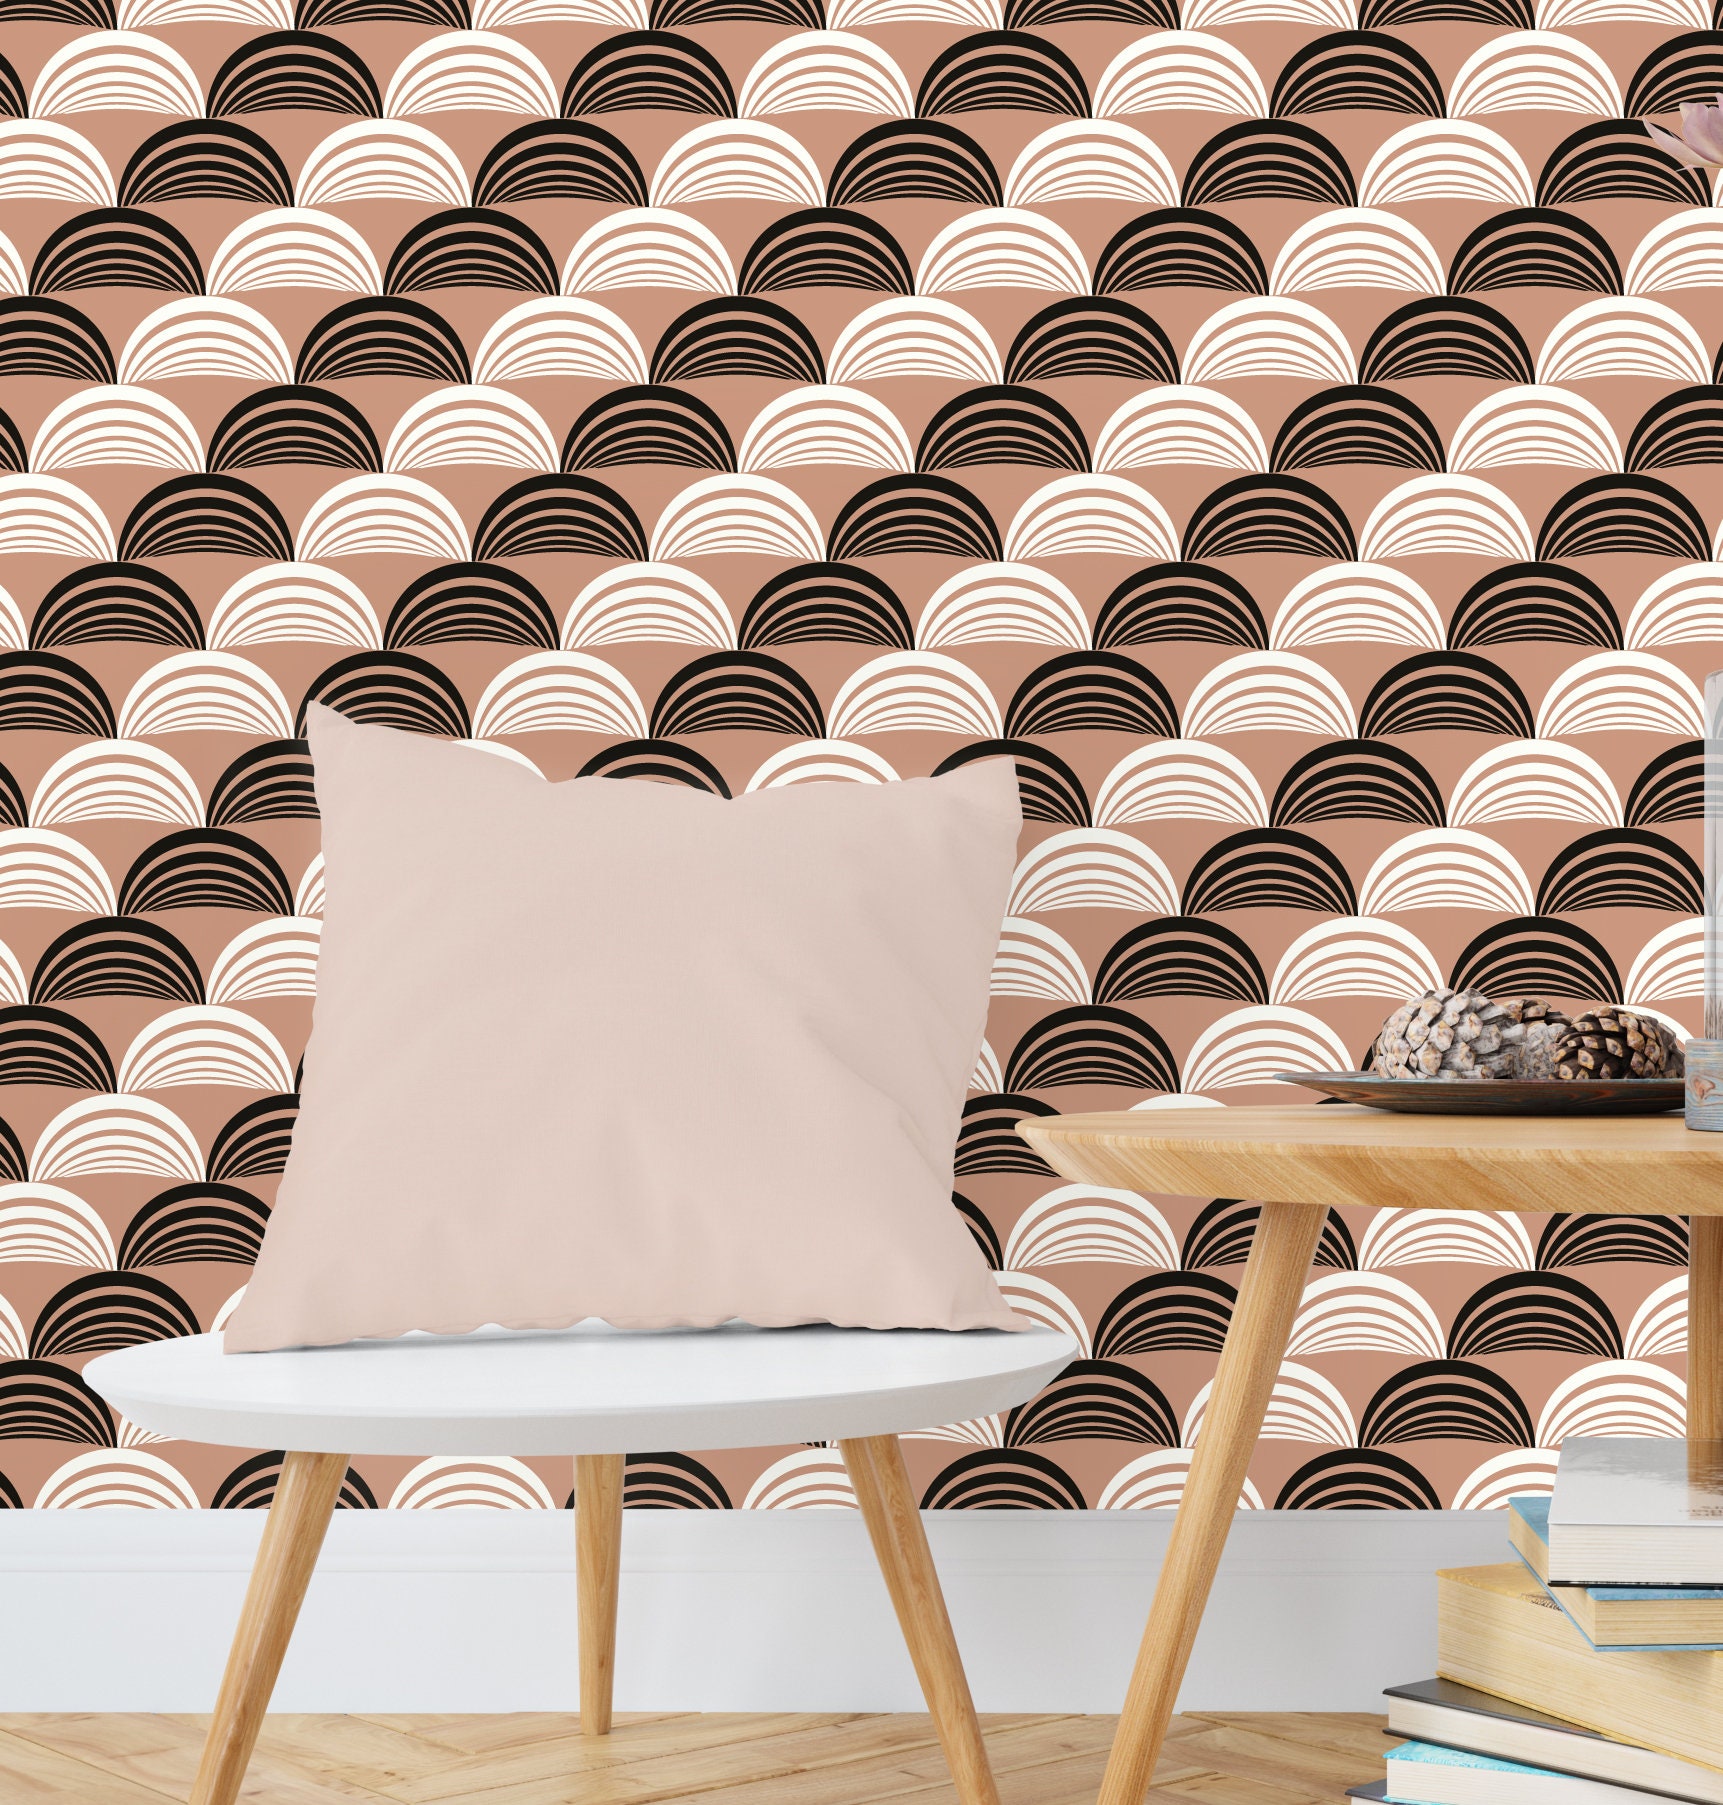 Removable Wallpaper-Self Adhesive Temporary Wallpaper-Peel and Stick-Wall Decor-Repositionable Wall Paper-Wall Mural-Geometric Wallpaper